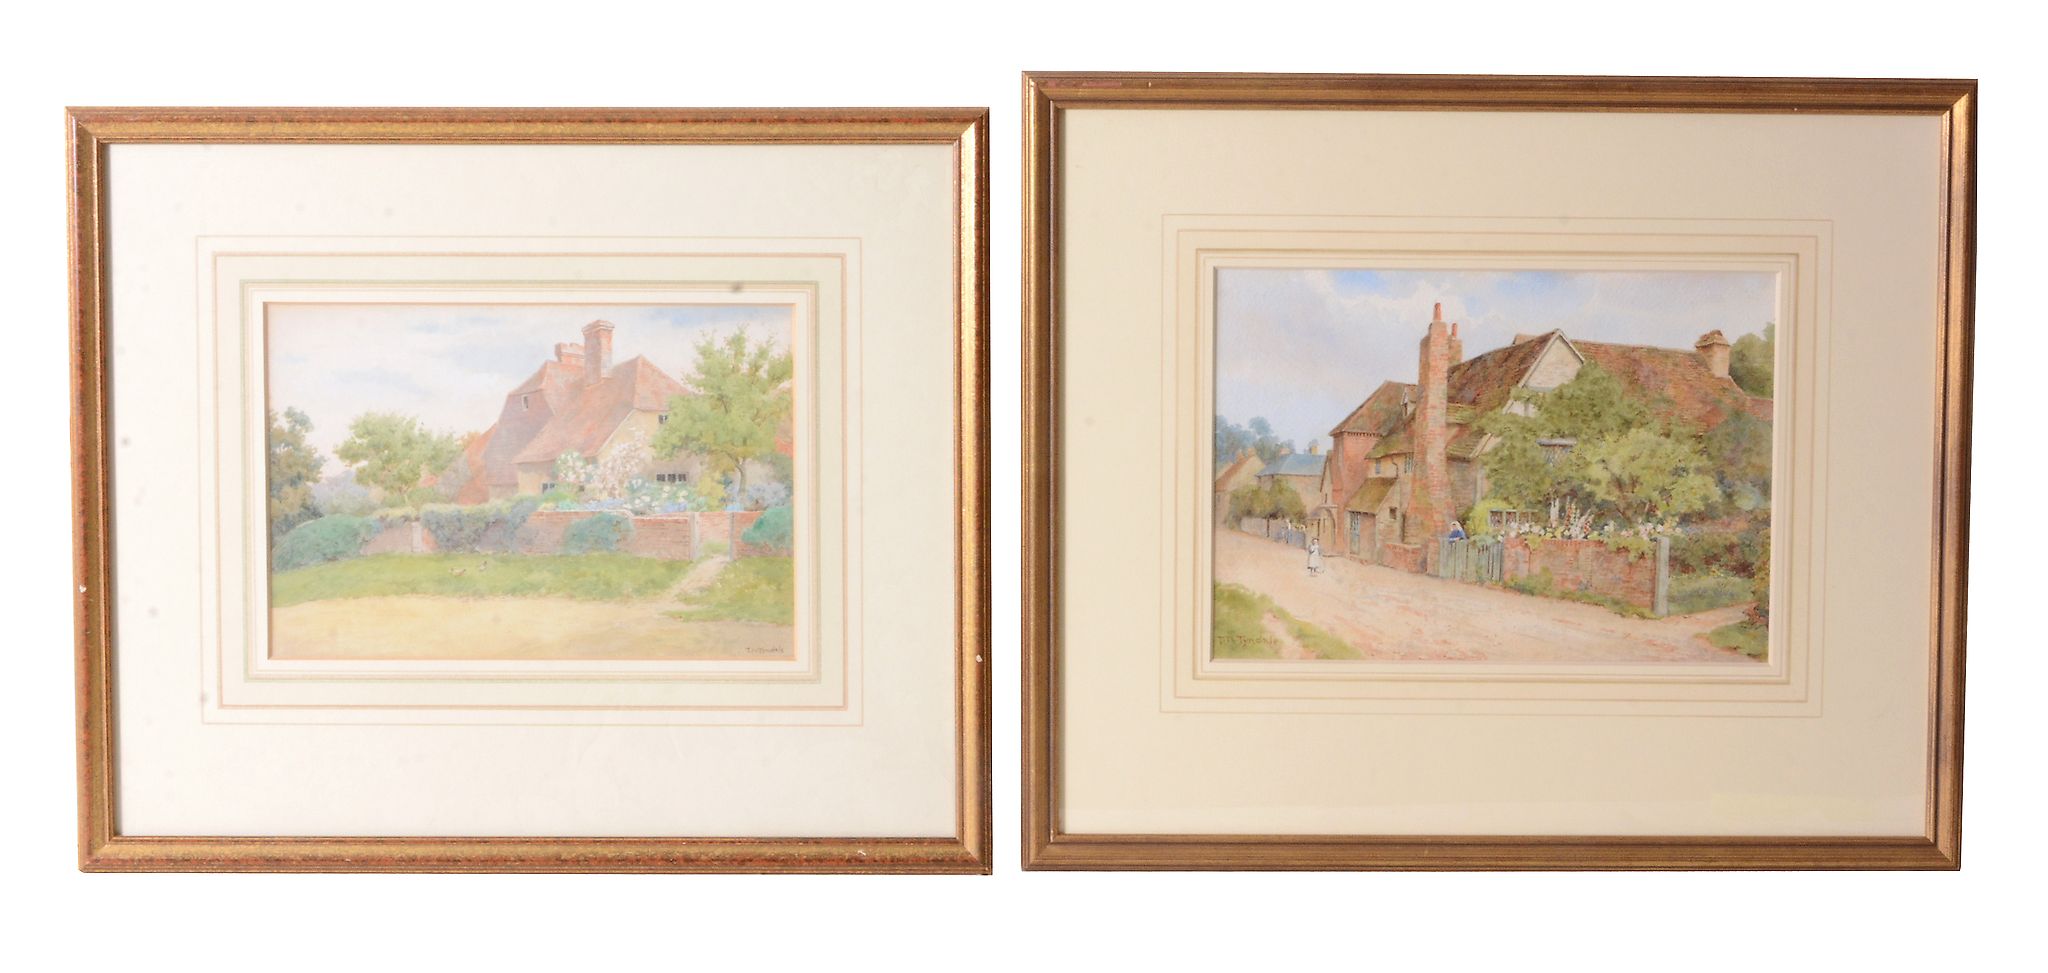 Thomas Nicholson Tyndale (1860-1930) - Evesham,Worcester  Watercolour Signed lower right 26 x 18